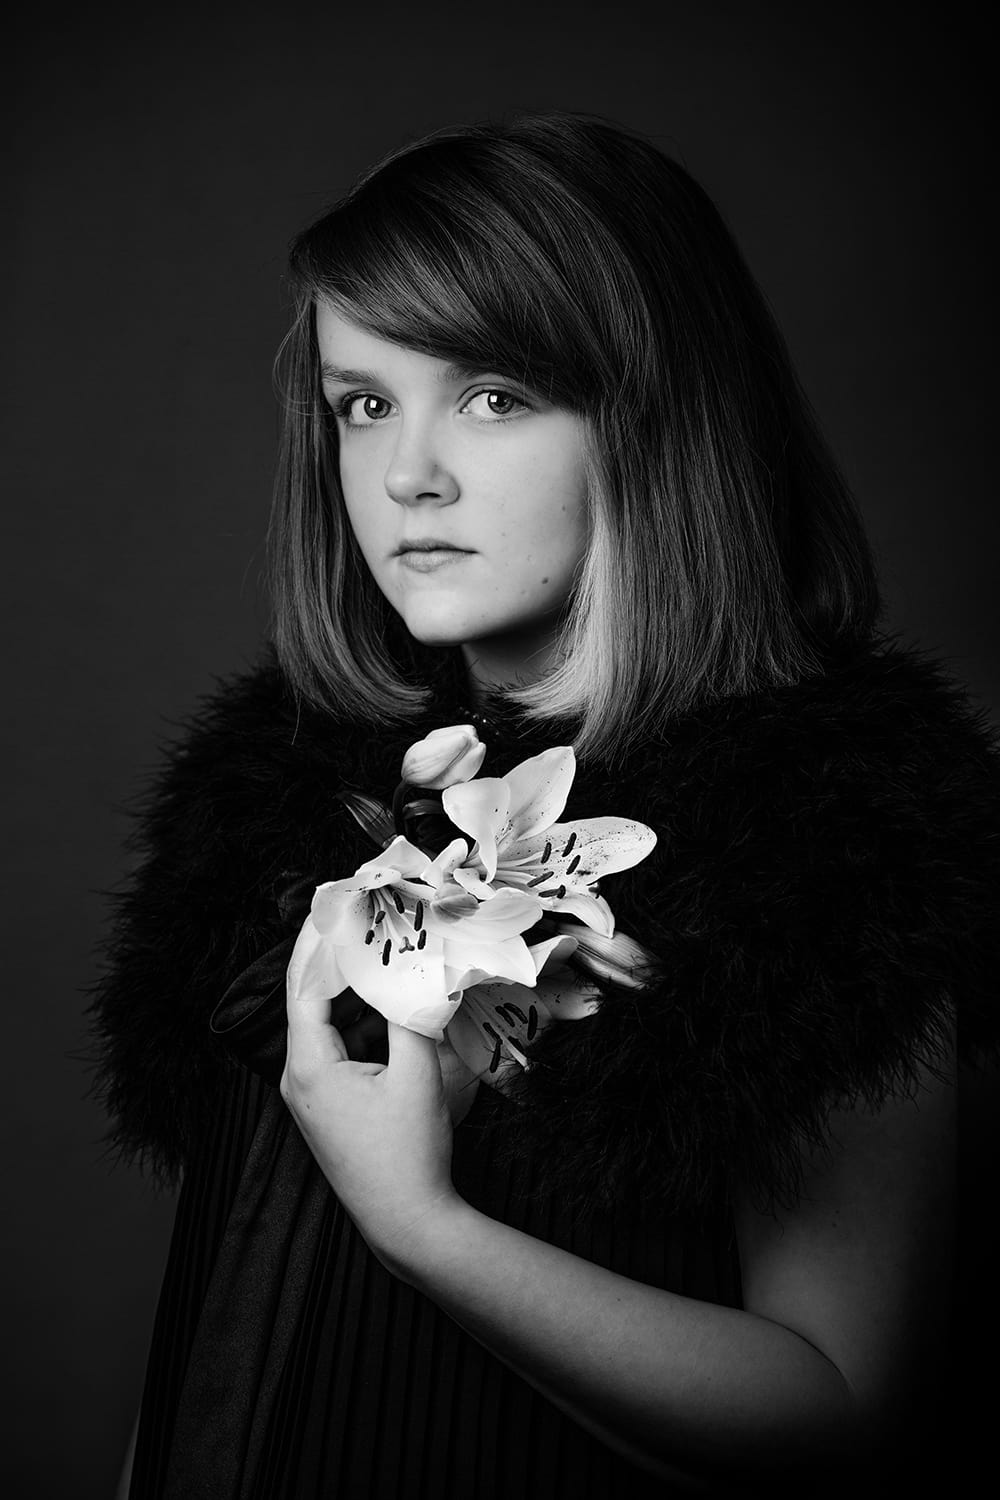 Black & white image of young teen wearing black looking at the camera holding a Lily